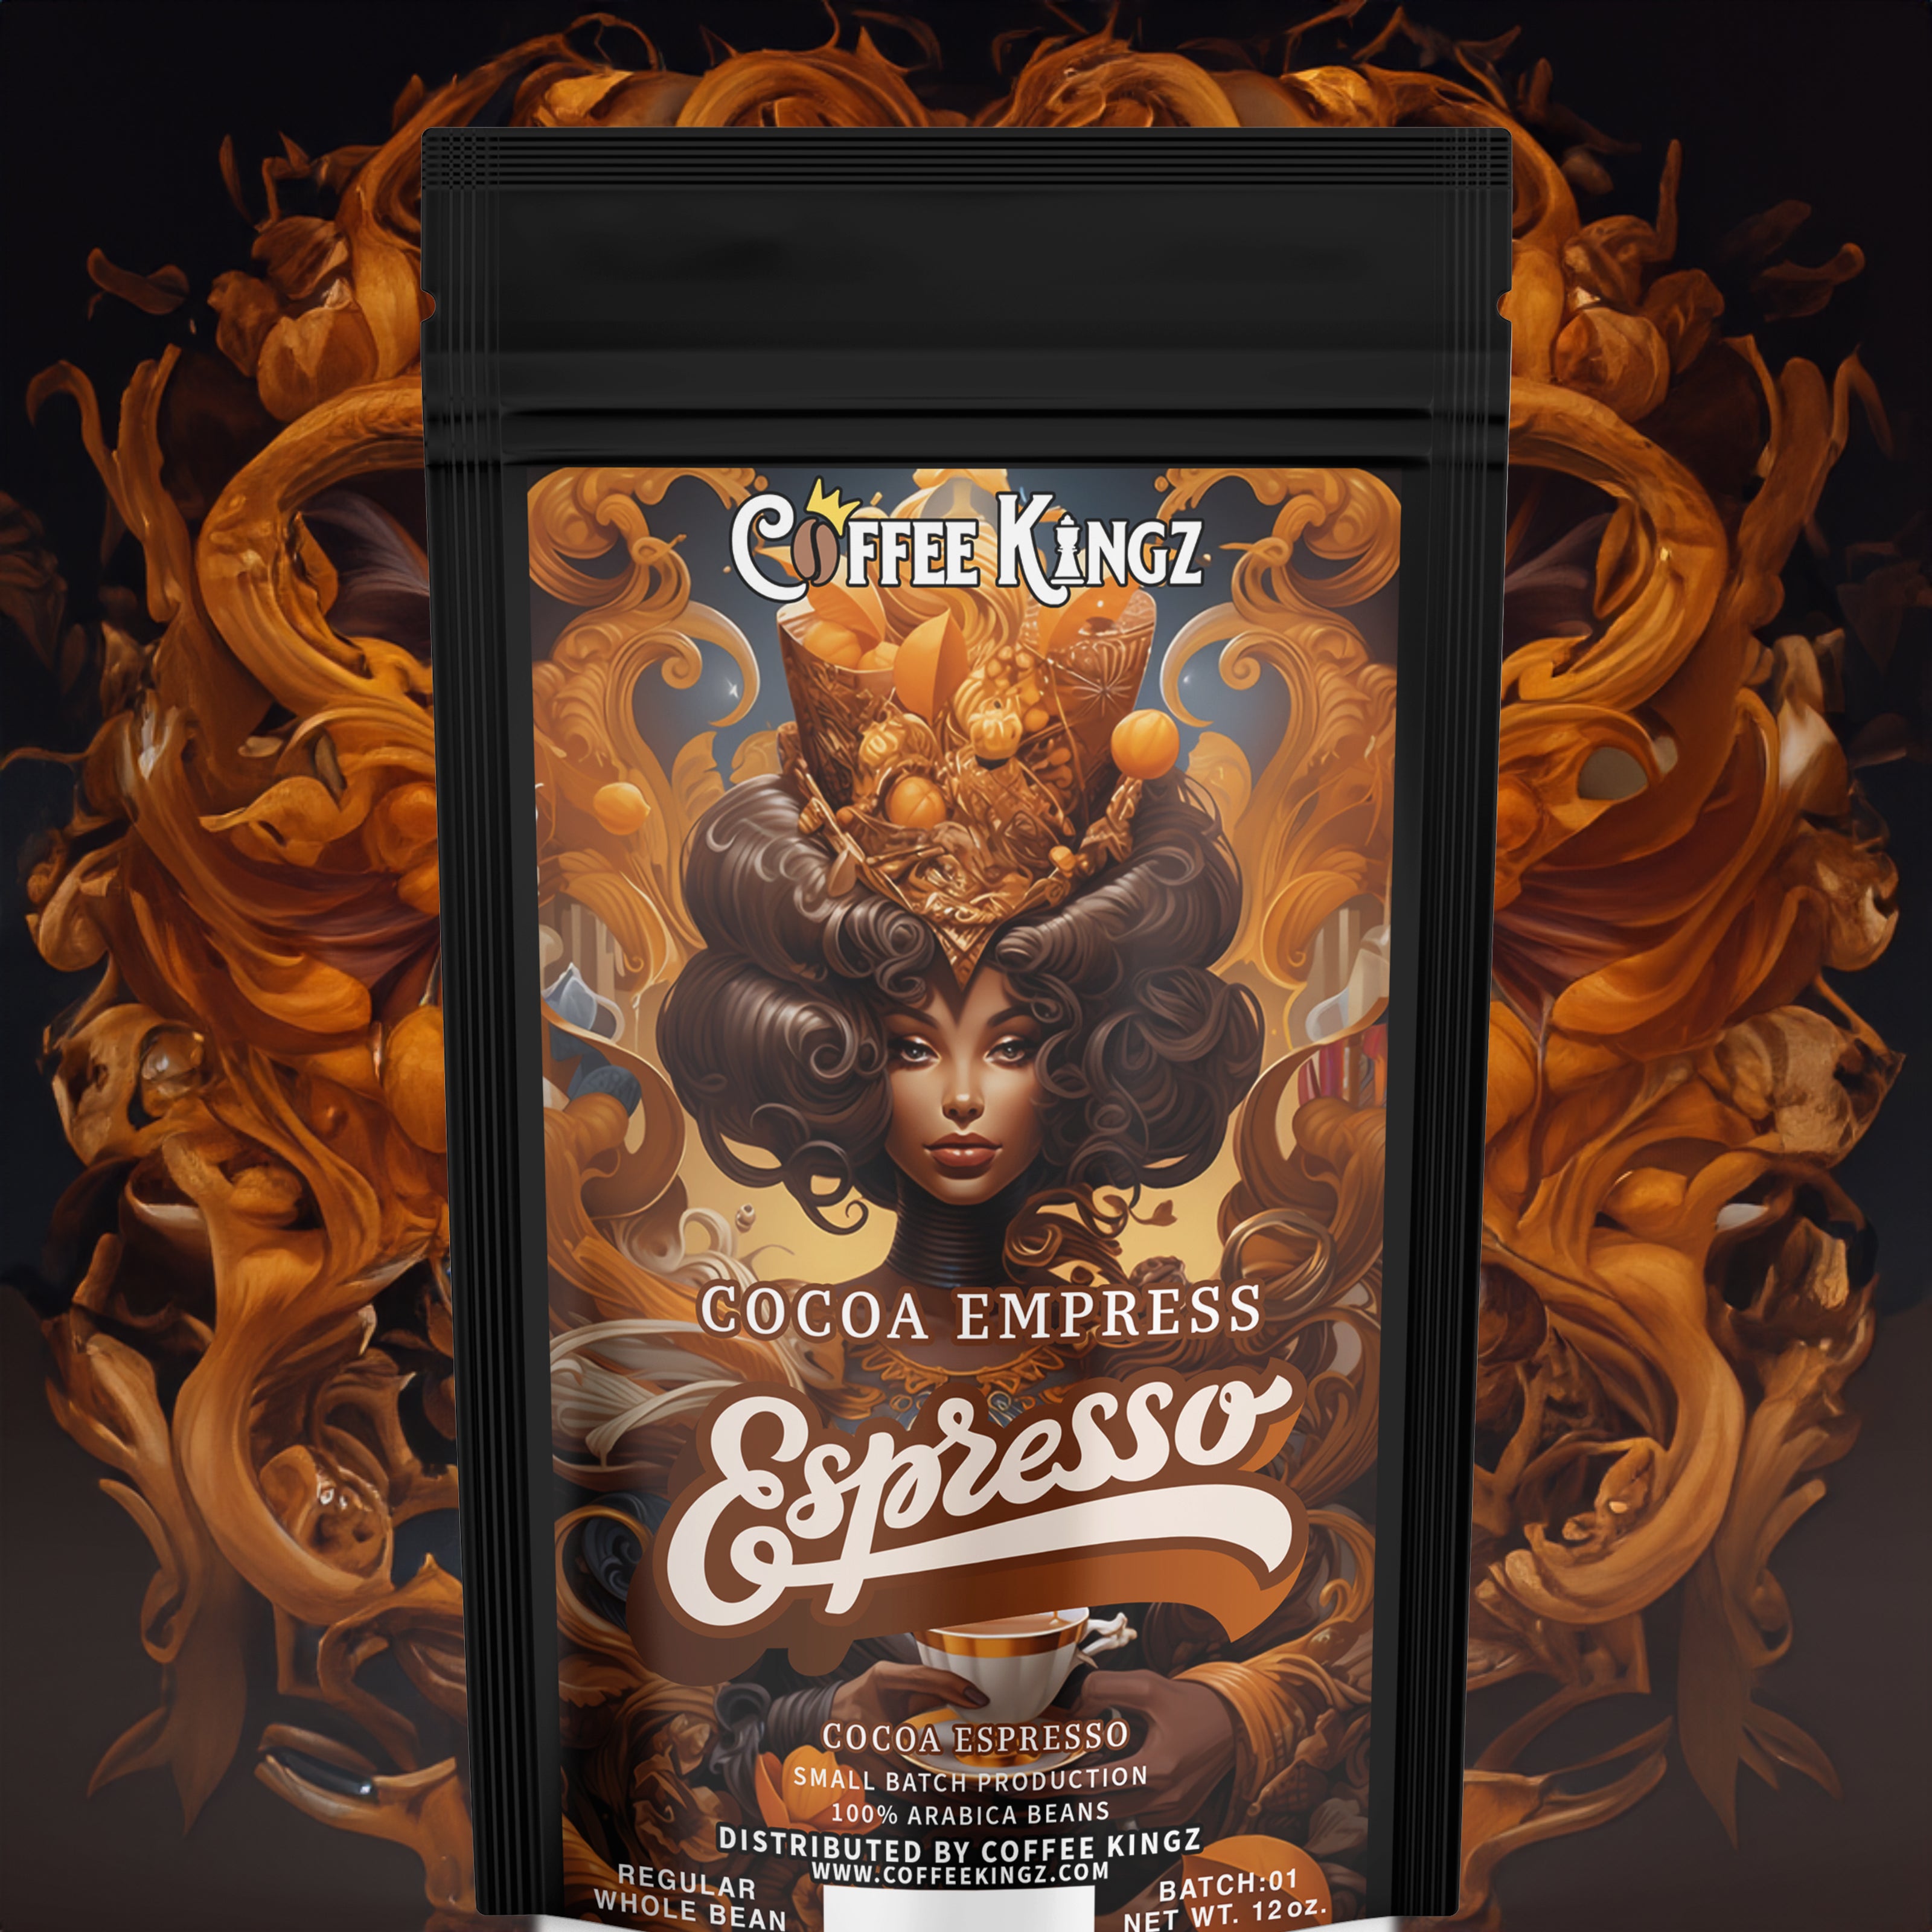 A package of "coffee kingz cocoa empress espresso" with an illustrated label featuring an ornate, regal character surrounded by swirling coffee bean motifs against a dramatic background of fiery coffee aroma.